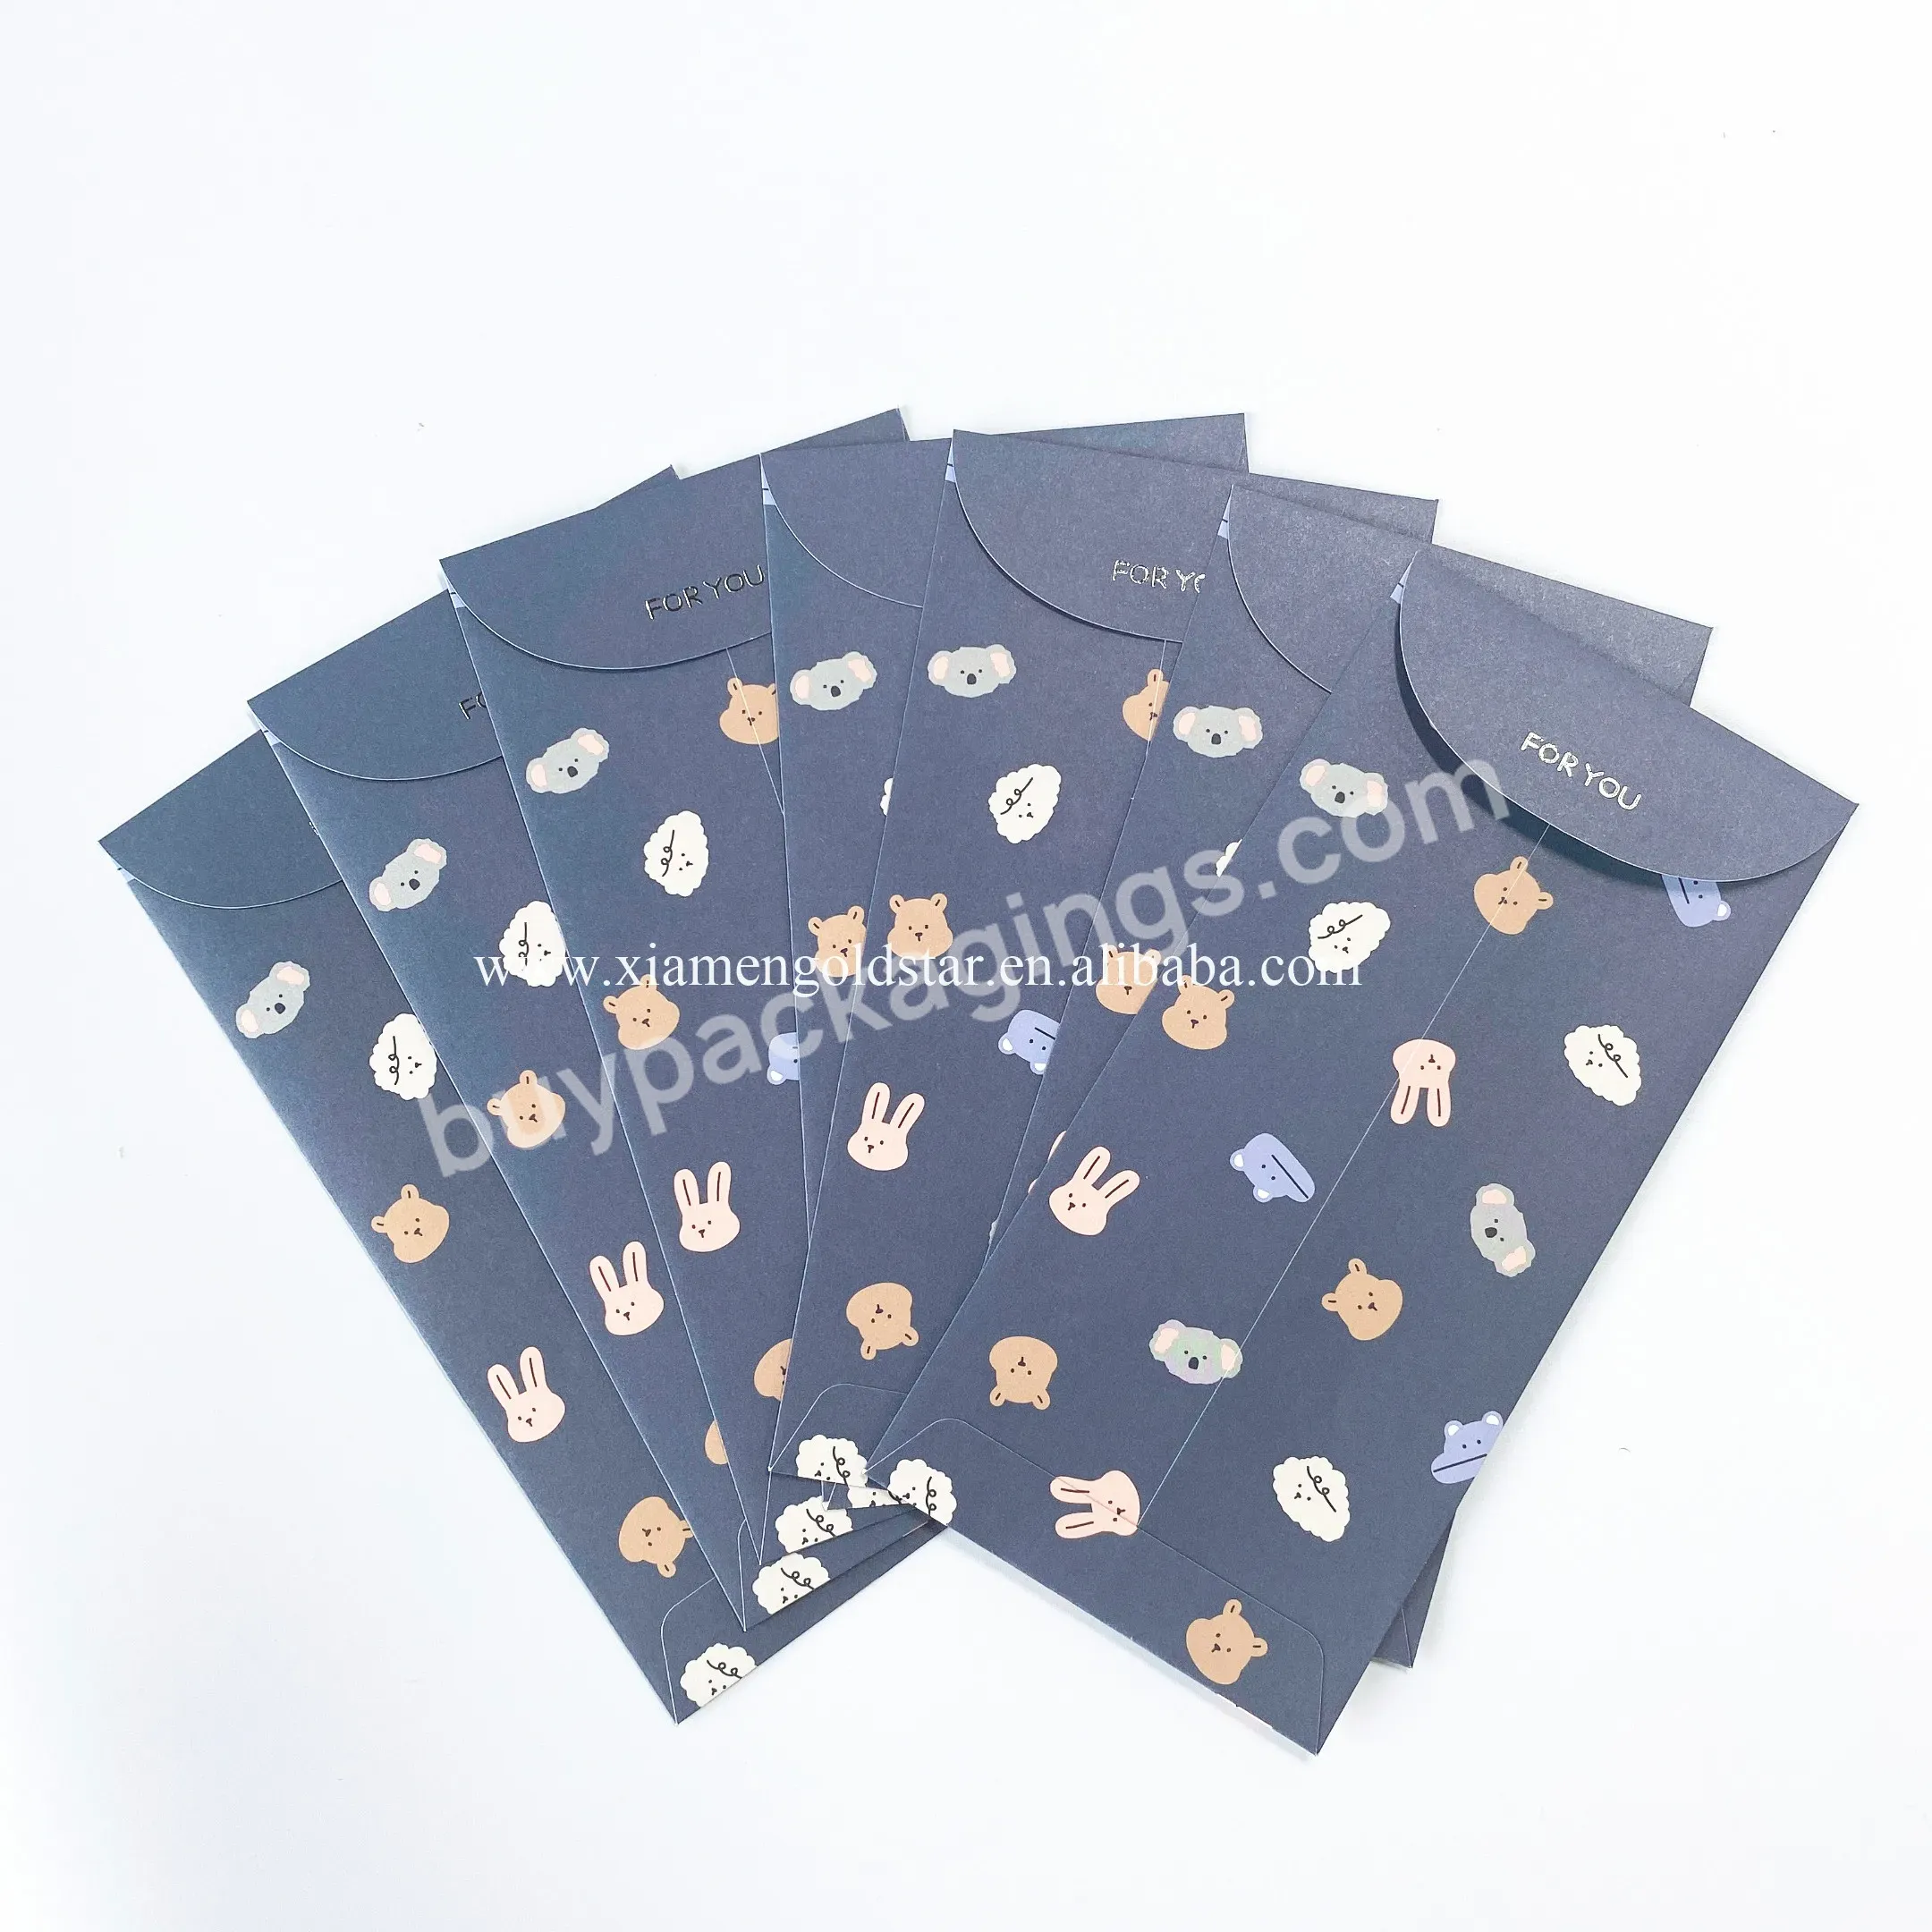 High Quality Cheap Customized A5 Envelope Die Cutting Invitation For Wedding Party Feast